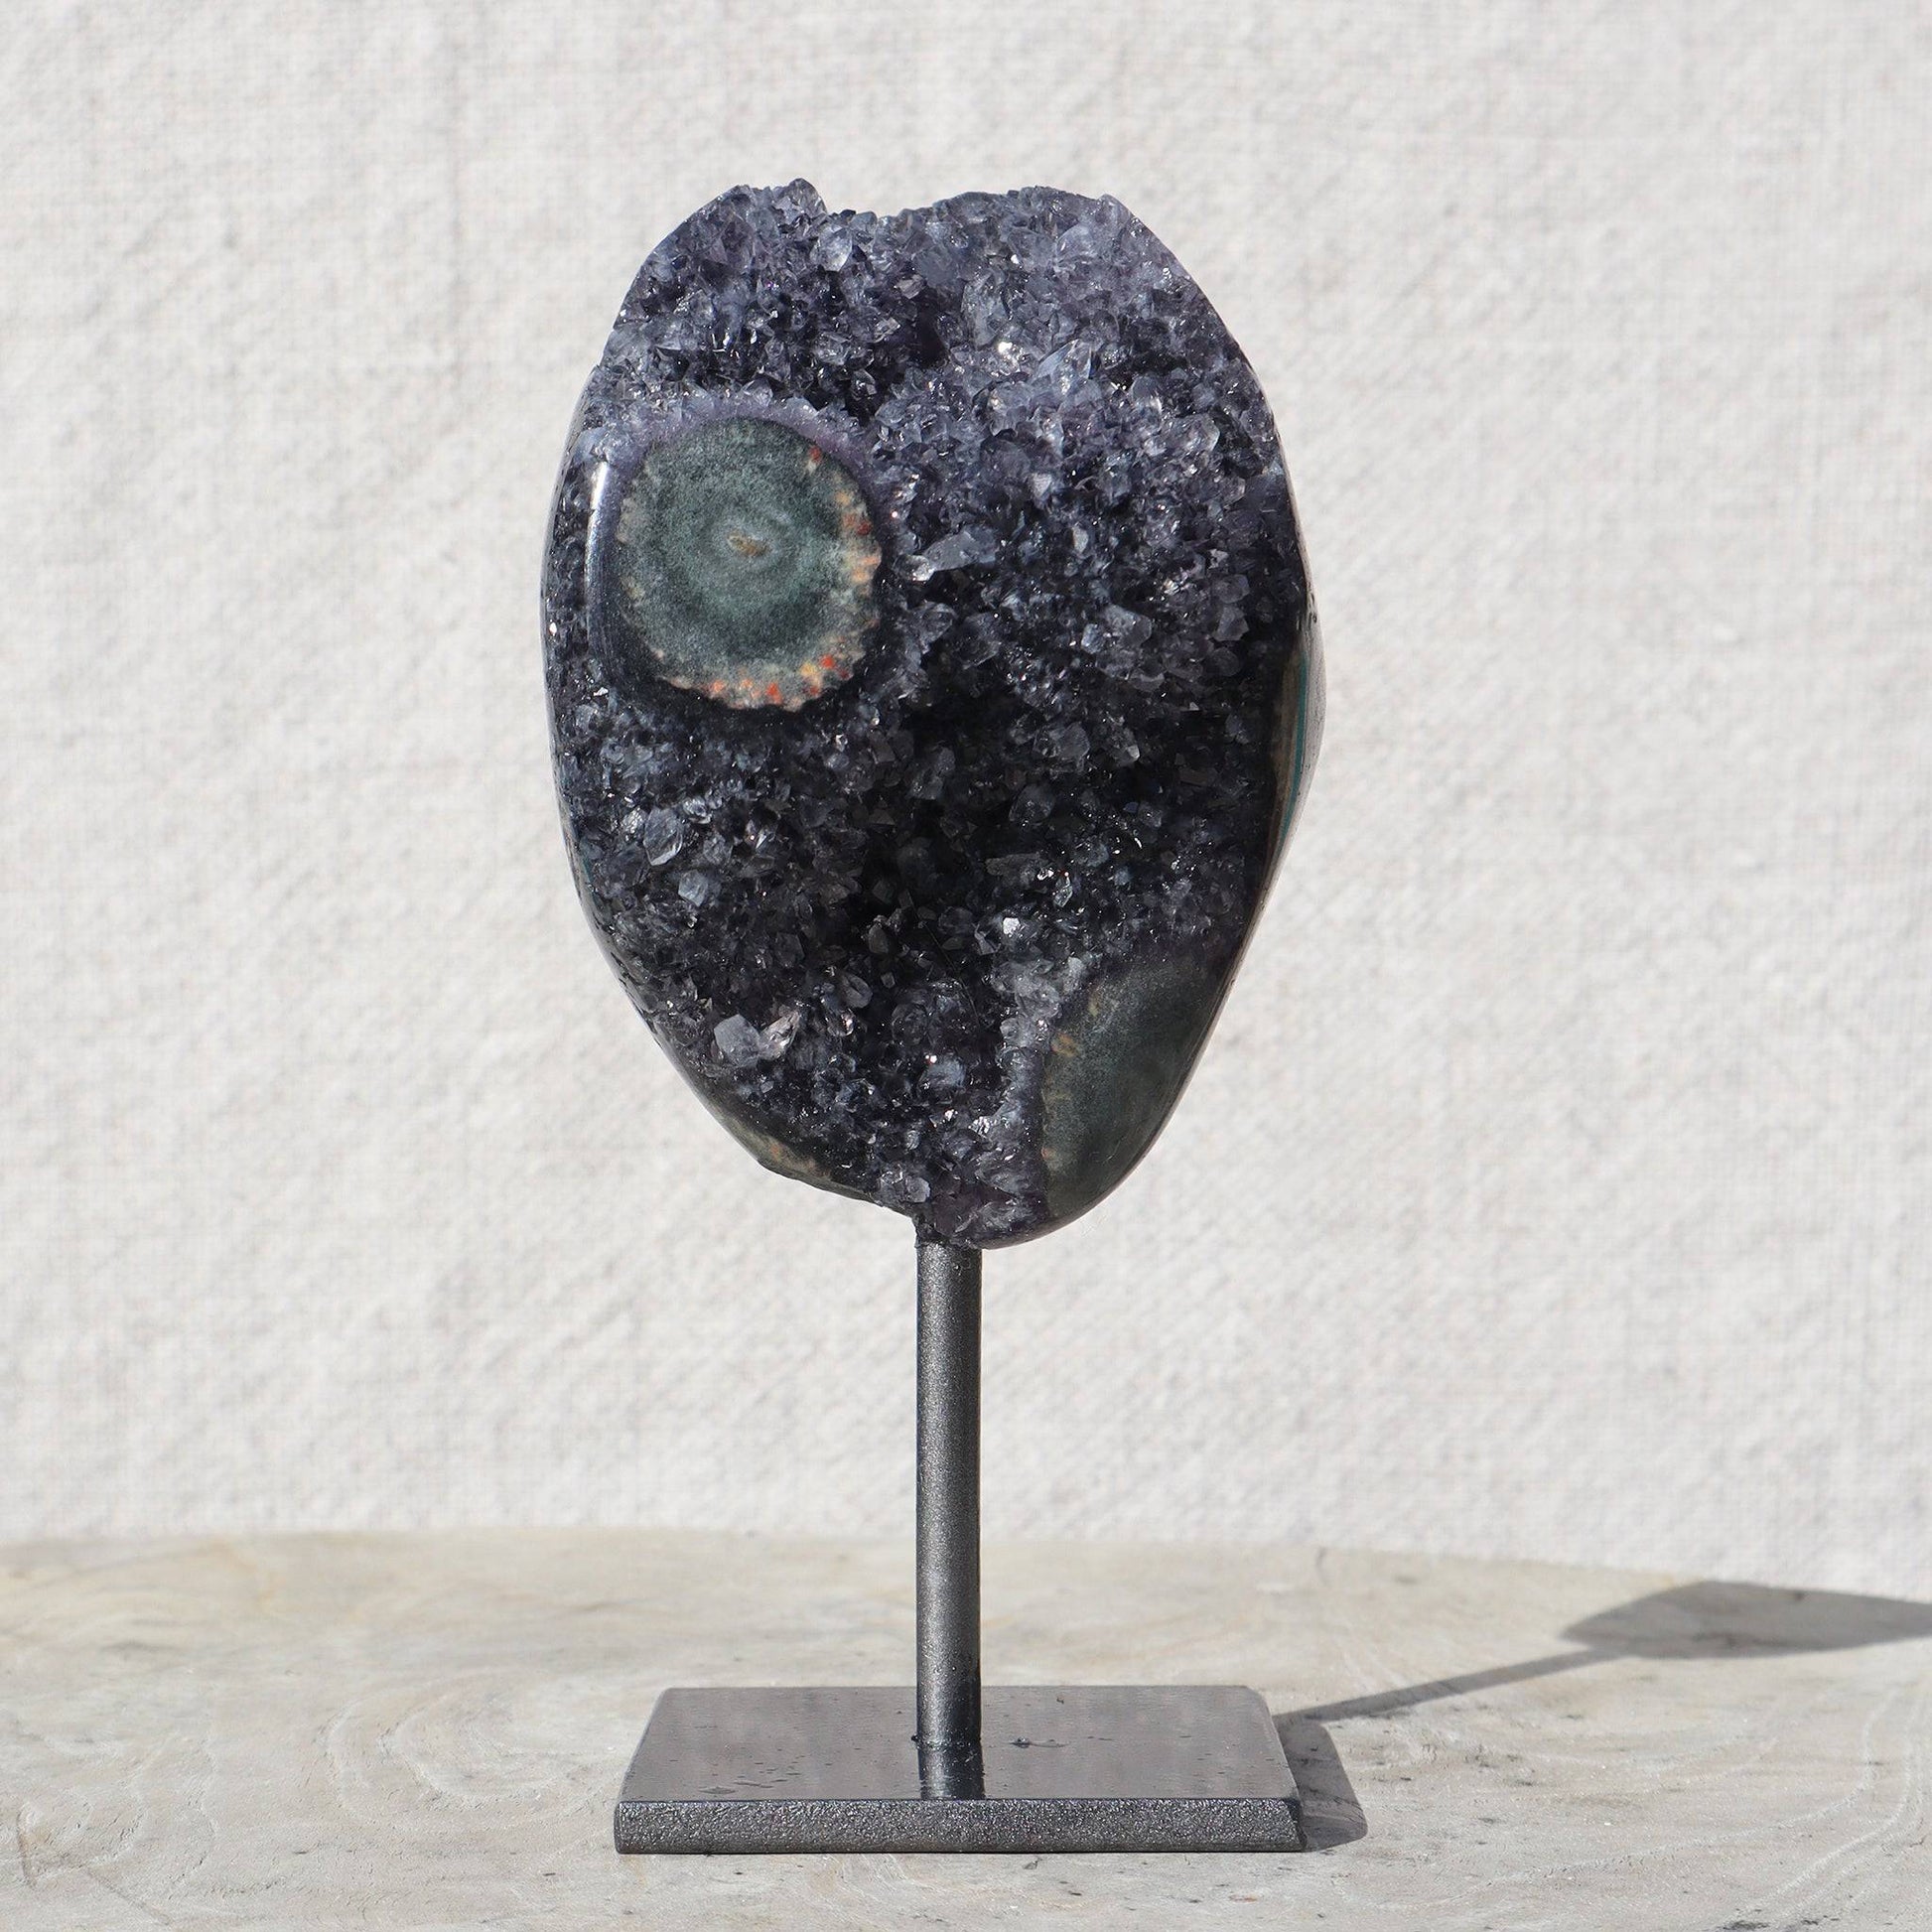 Appealing mounted amethyst of lite charcoal color with a tint of purple quartz crystals with exceptional detail of a colorful green agate cut stalactite. The polished back elevates the aesthetics of this small piece belonging to your desk or bedside.